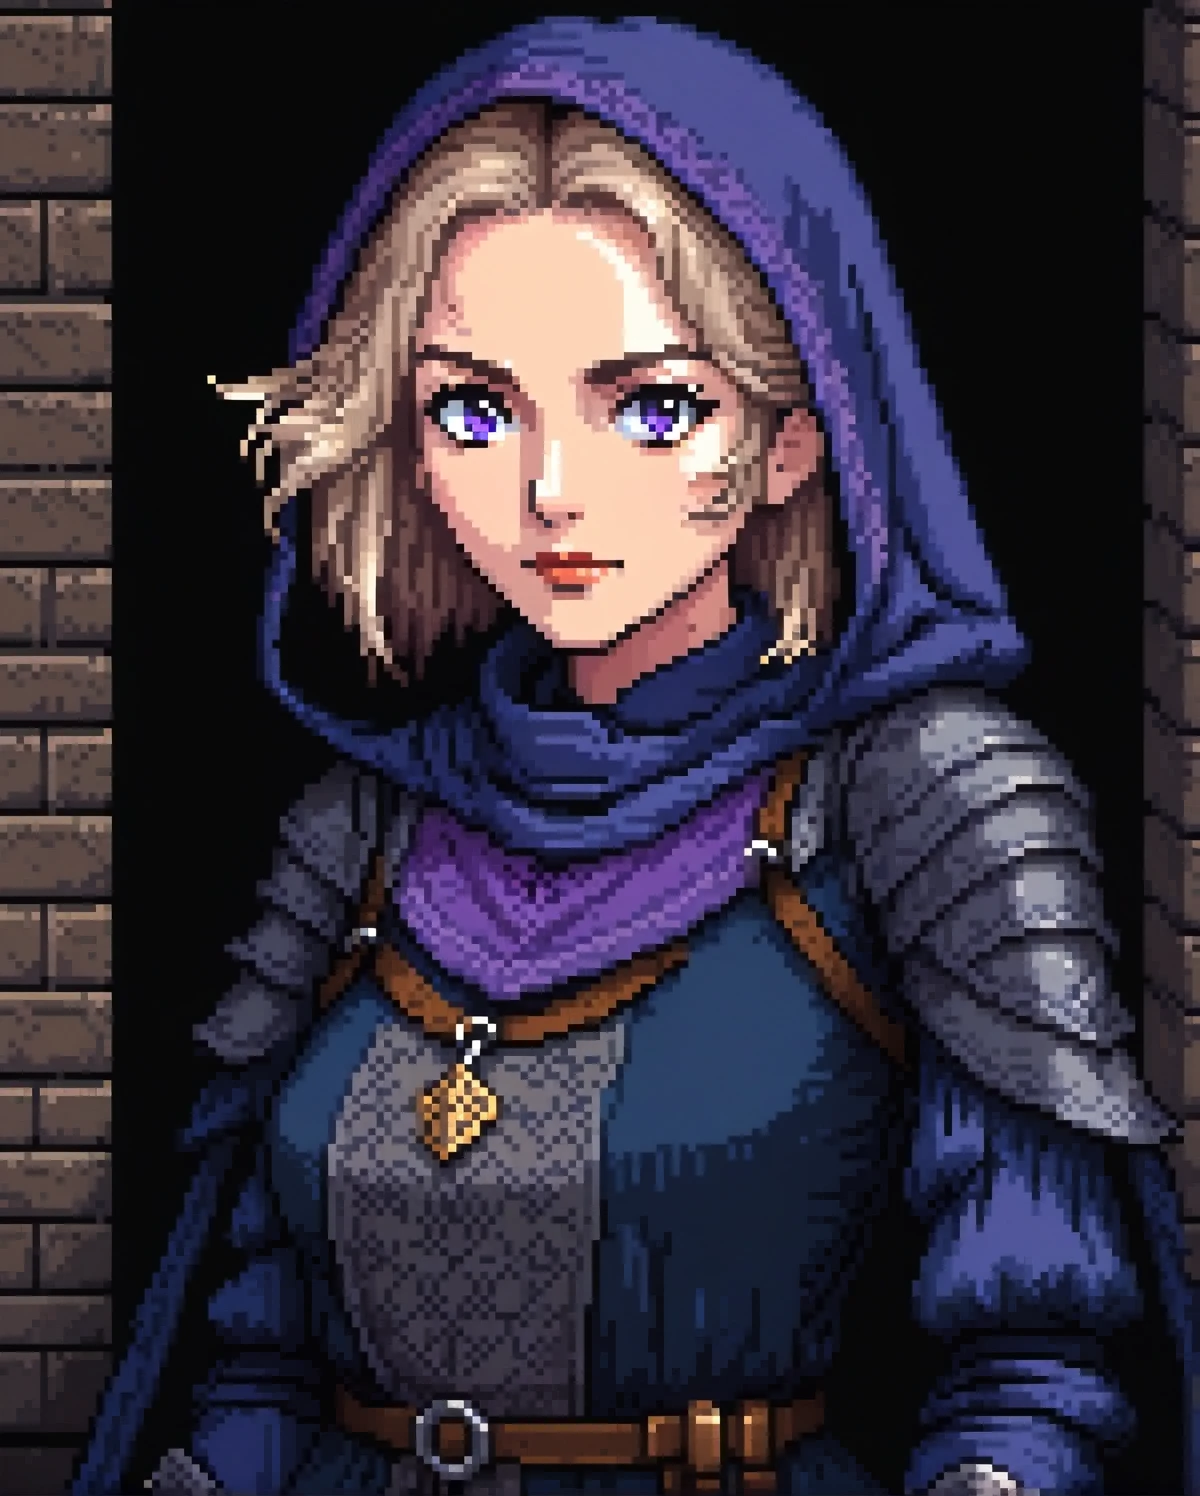 (Pixel art: 1.2), 1 middle-aged woman, around 50 years old, bandit dark blue medieval clothes, with a fitted design, light brownish hair, front view, visible lips and nose, purple eyes, black background, calm and misterious expression.